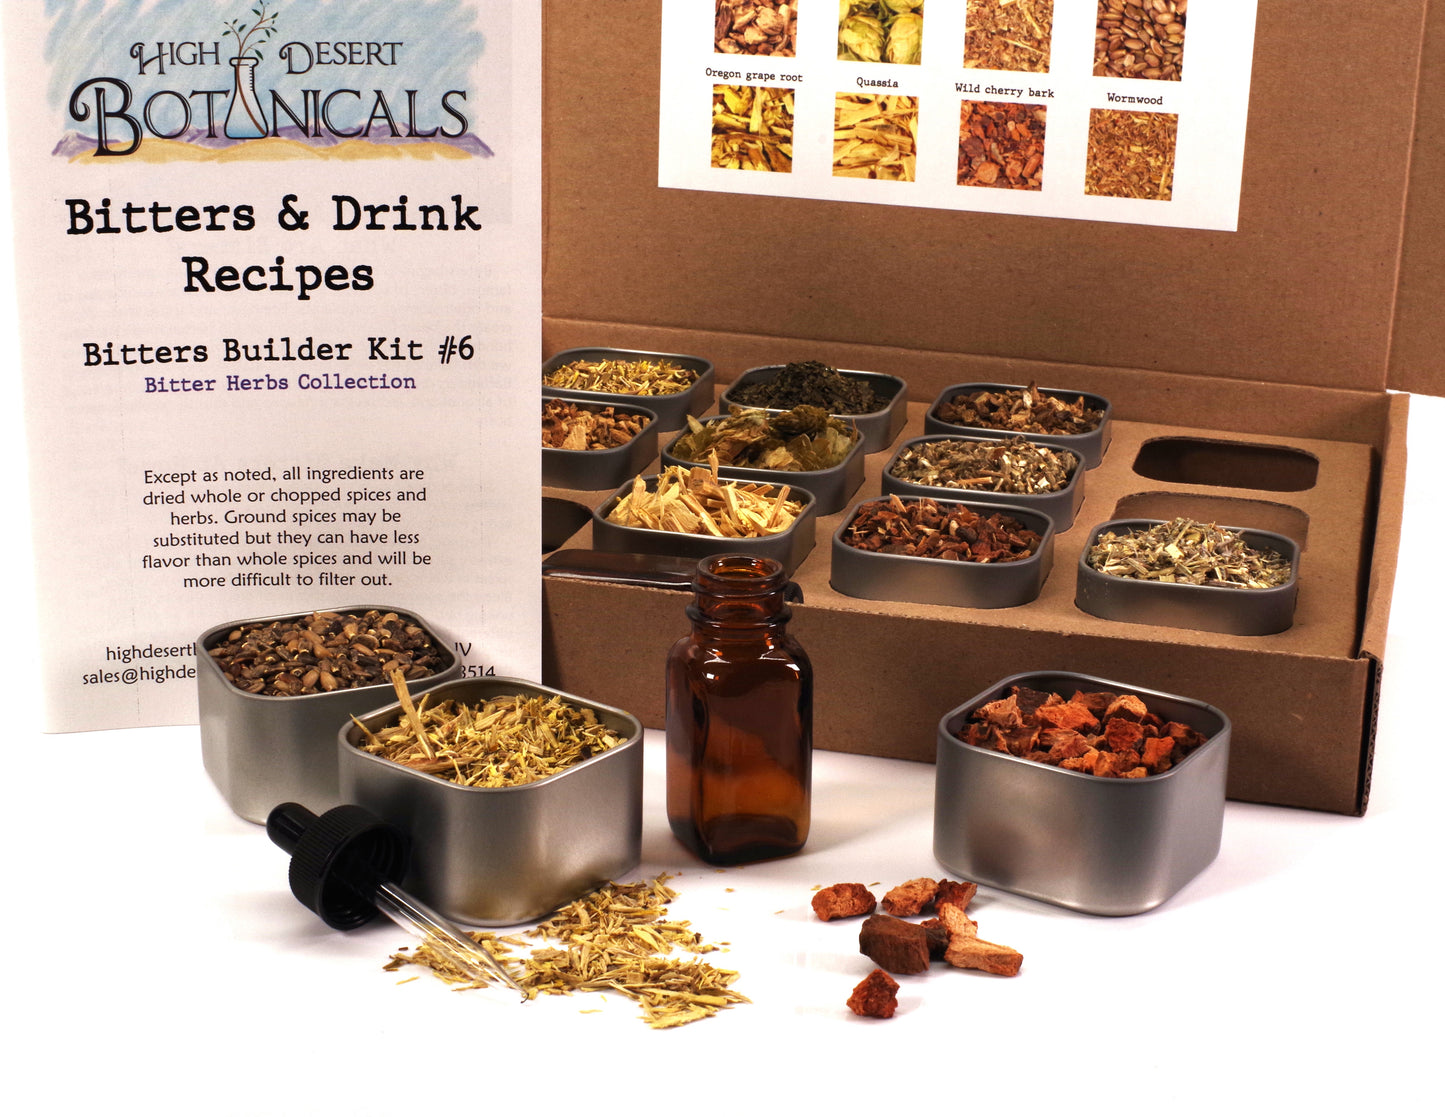 Bitters Builder Kit #6 - Bitter Herbs Collection